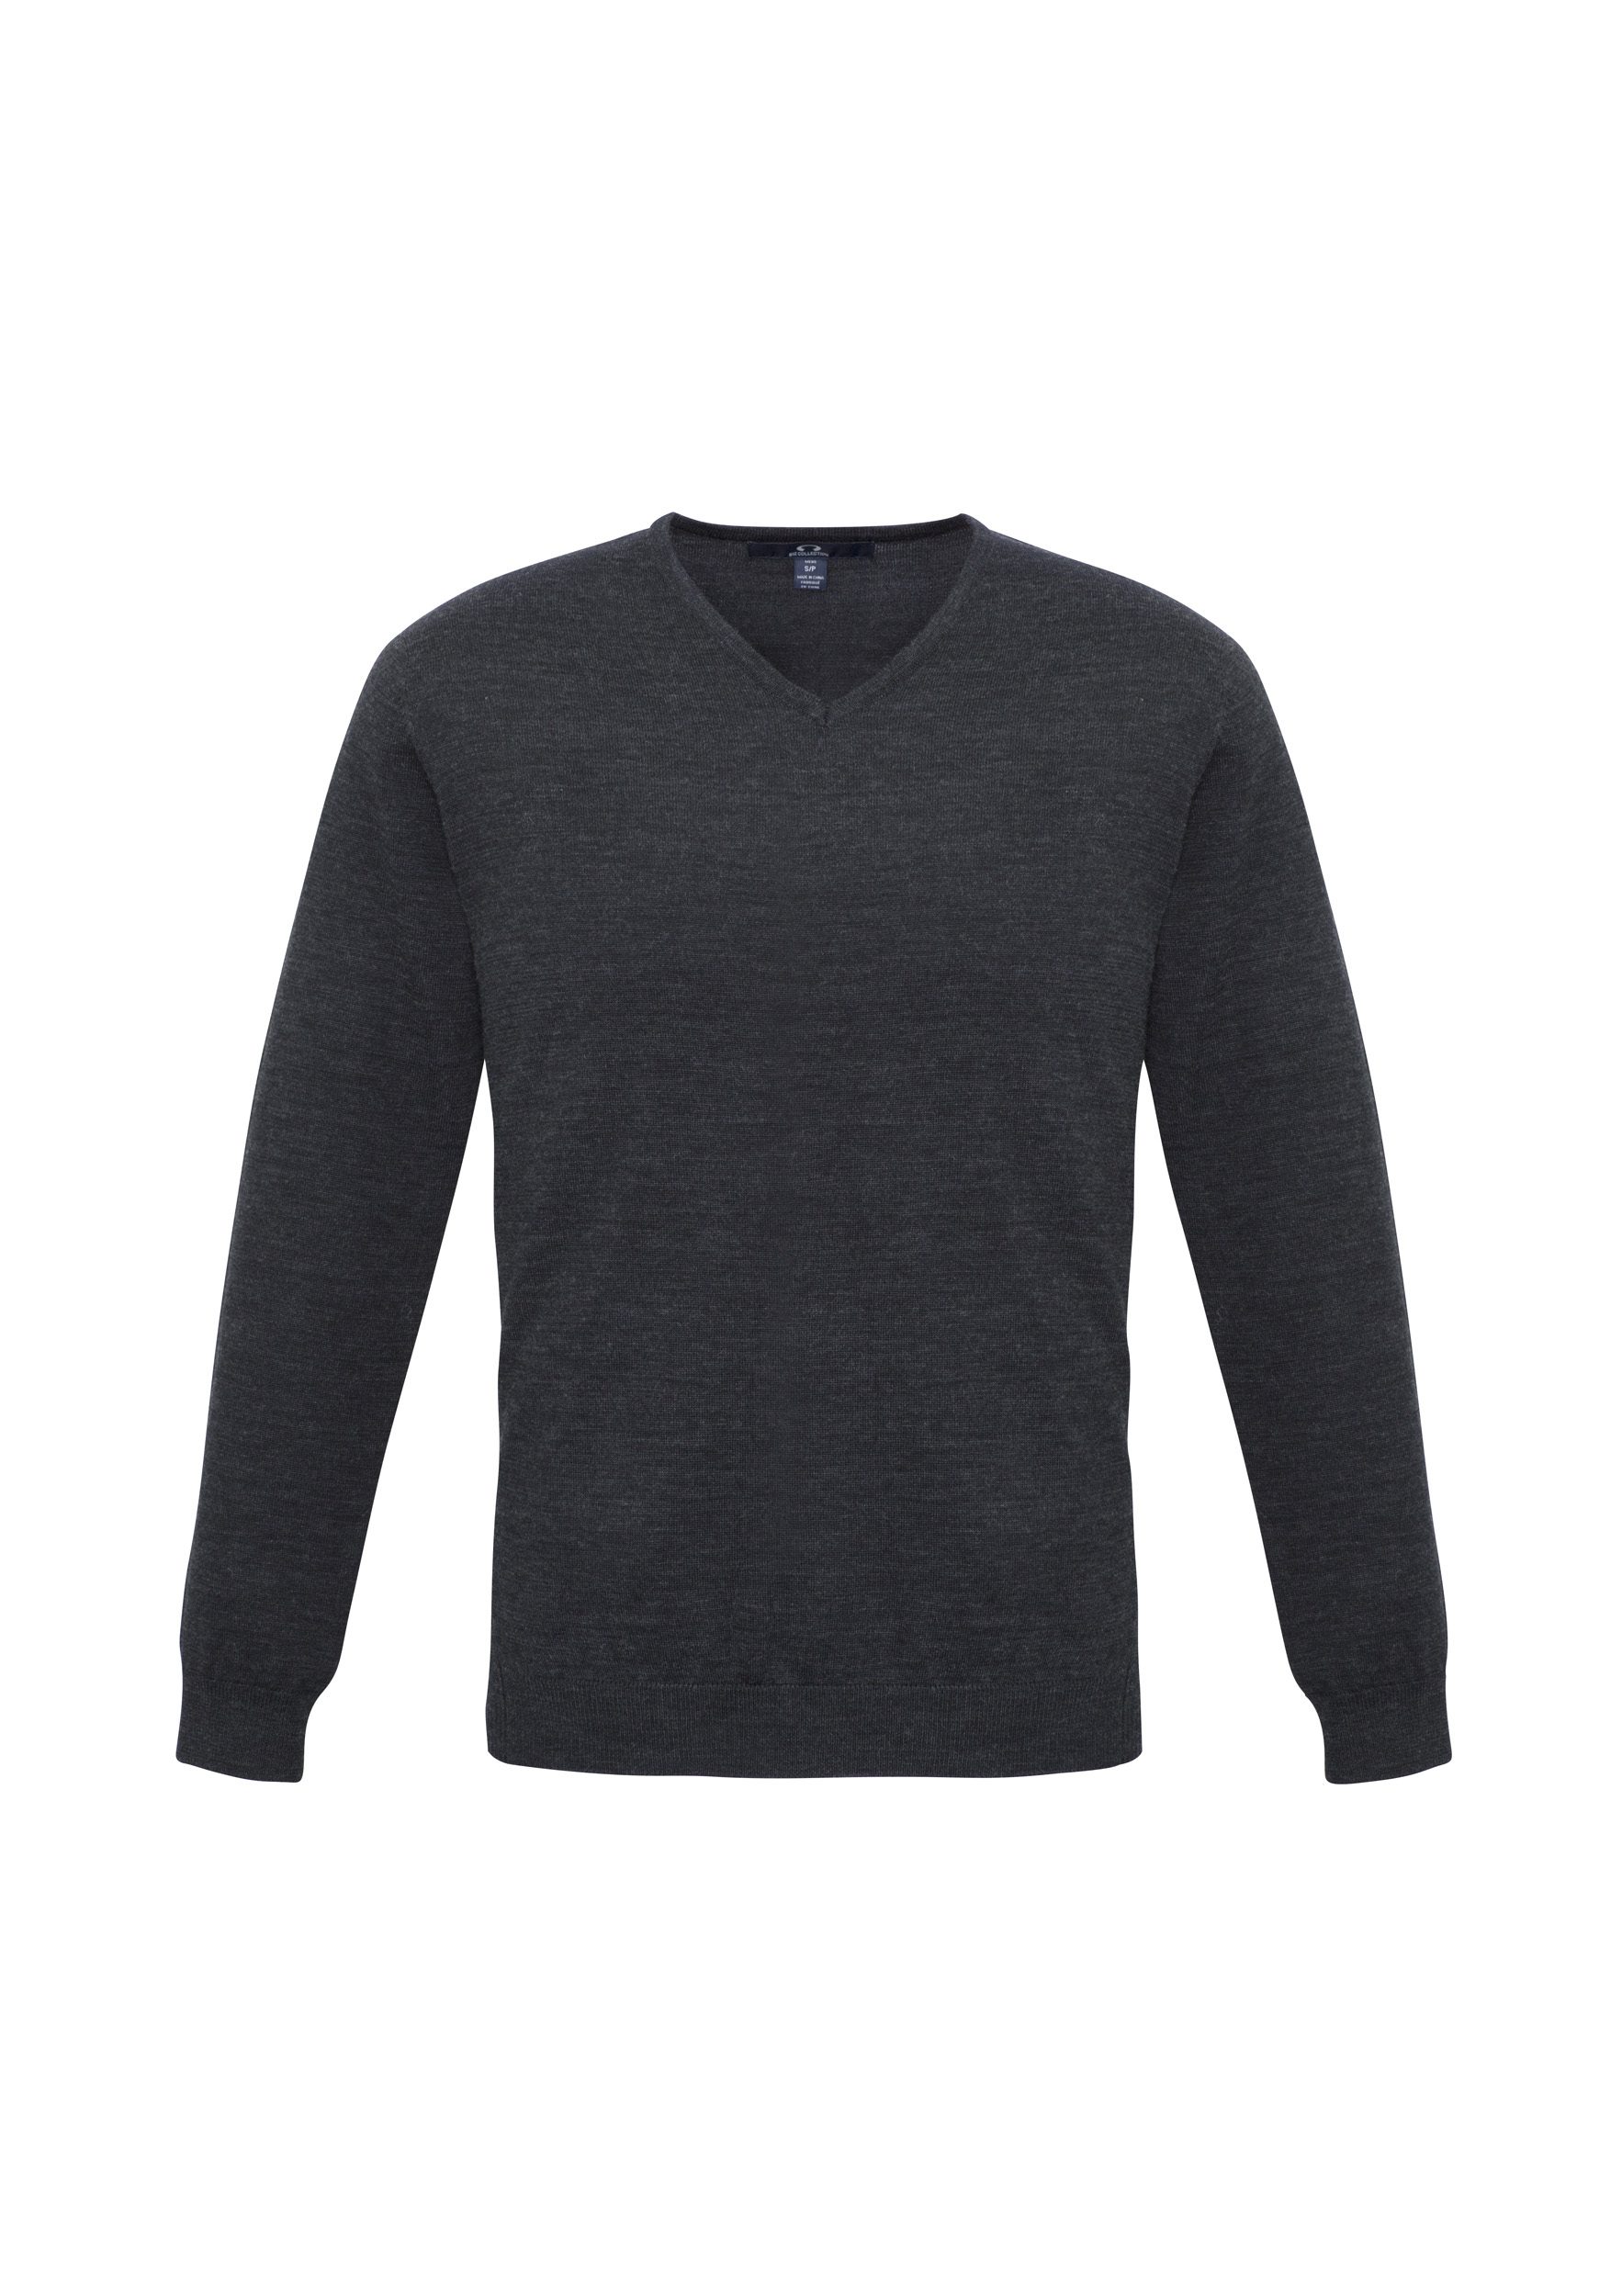 Biz Collection Men's Milano Pullover #WP417M Charcoal